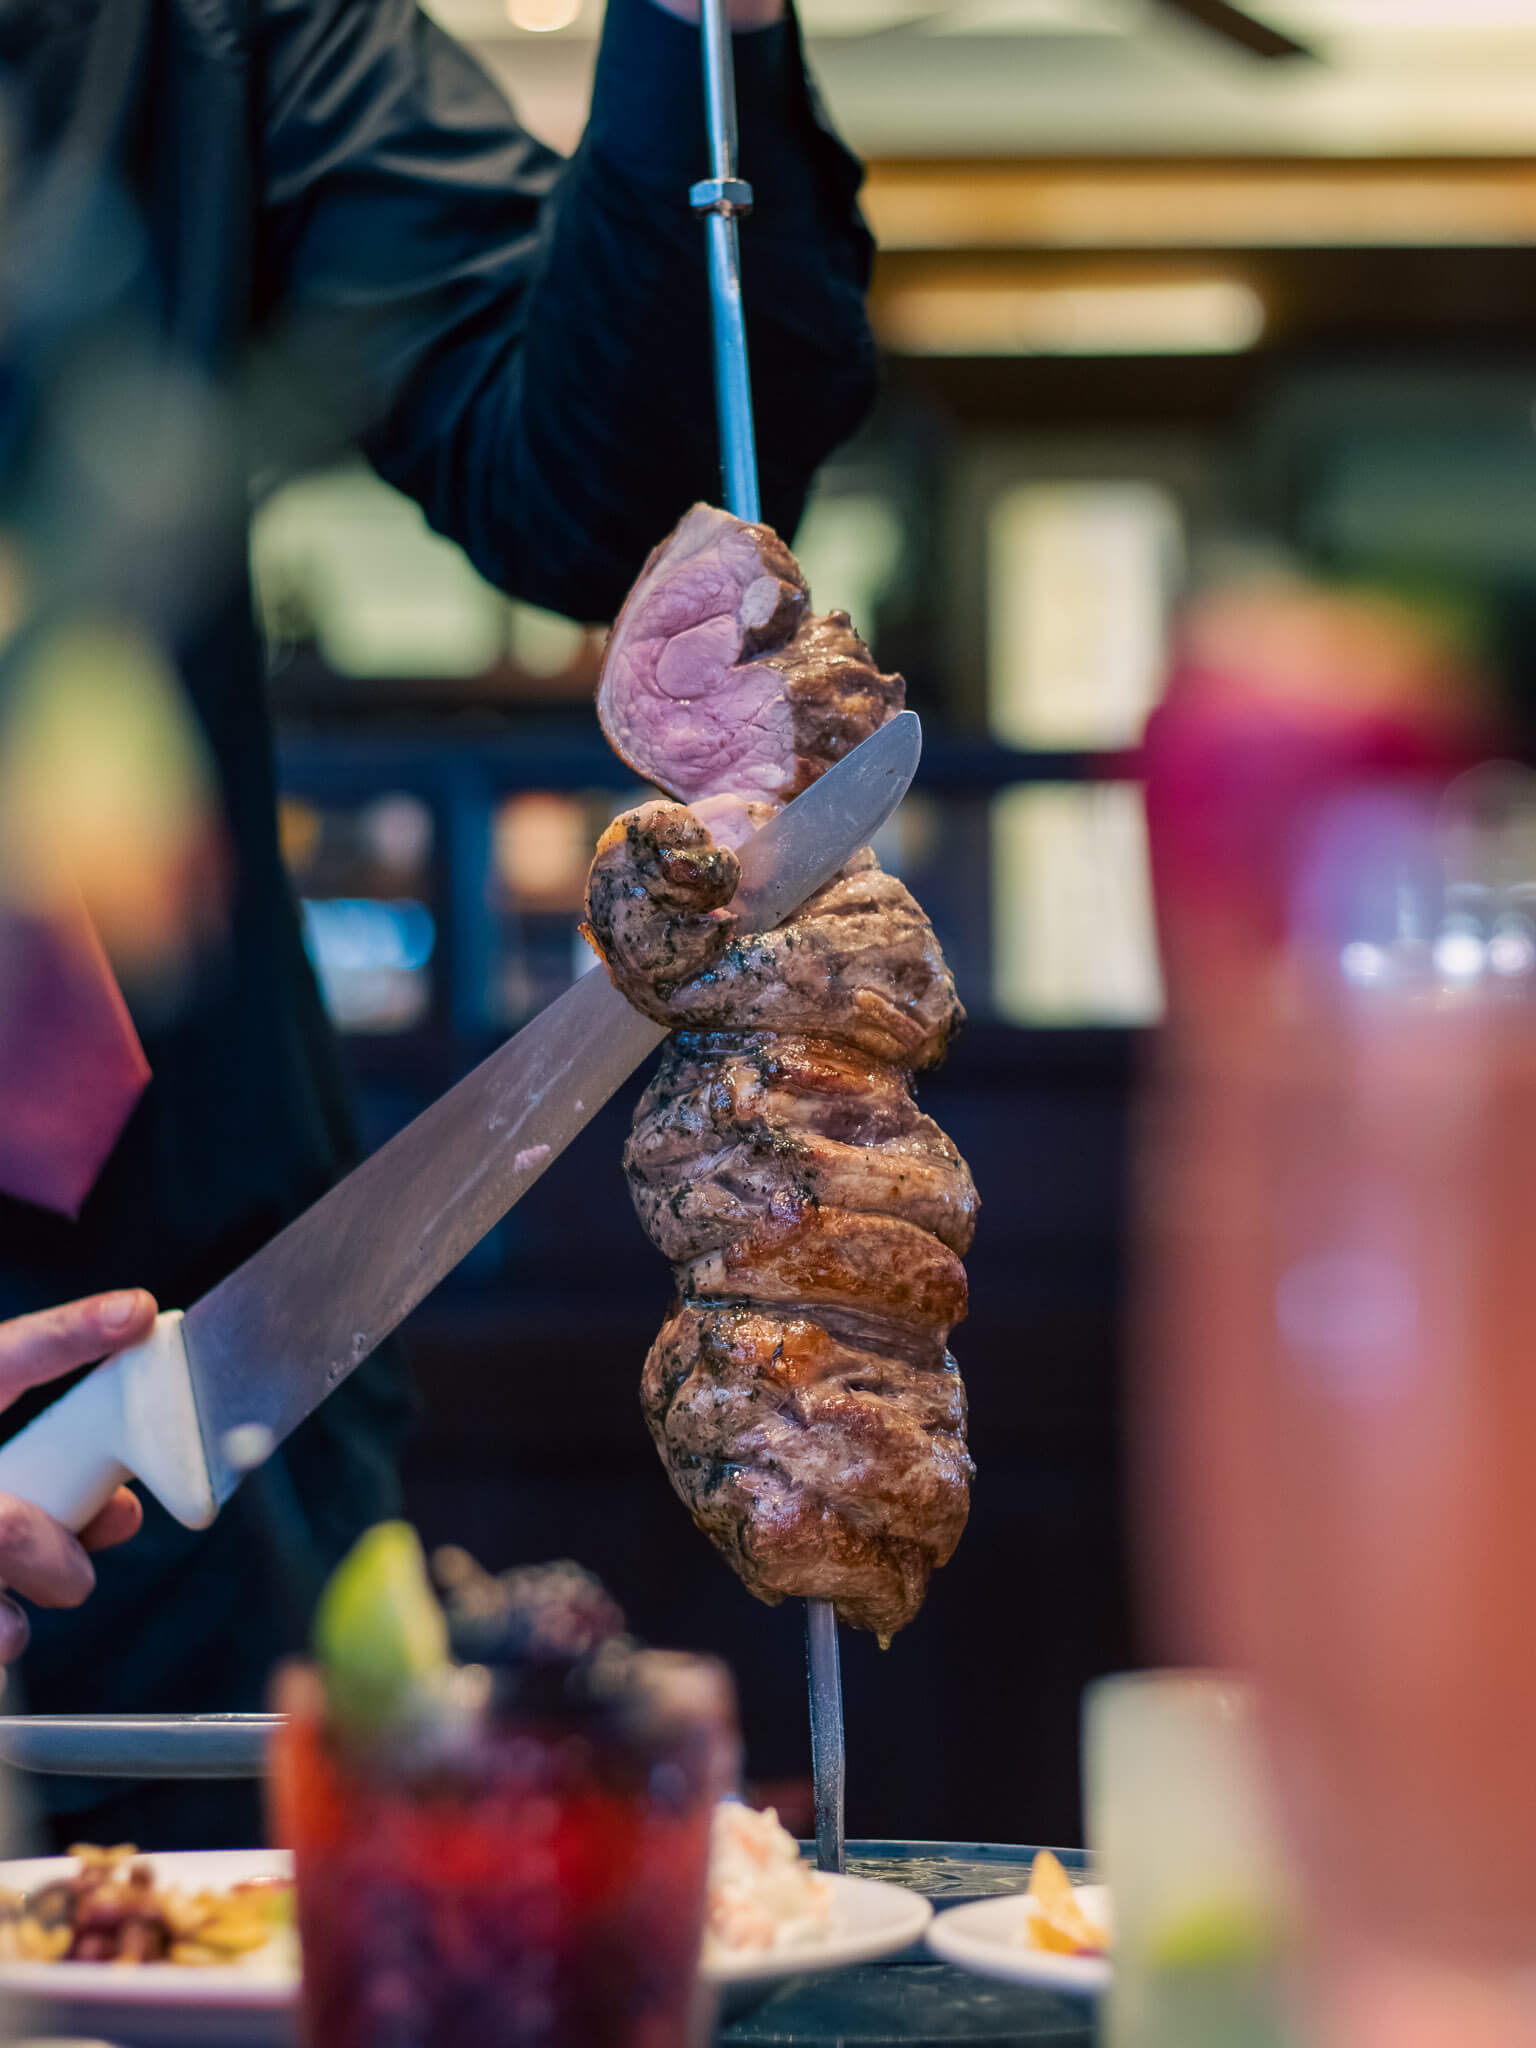 Waiter carving meat off a skewer